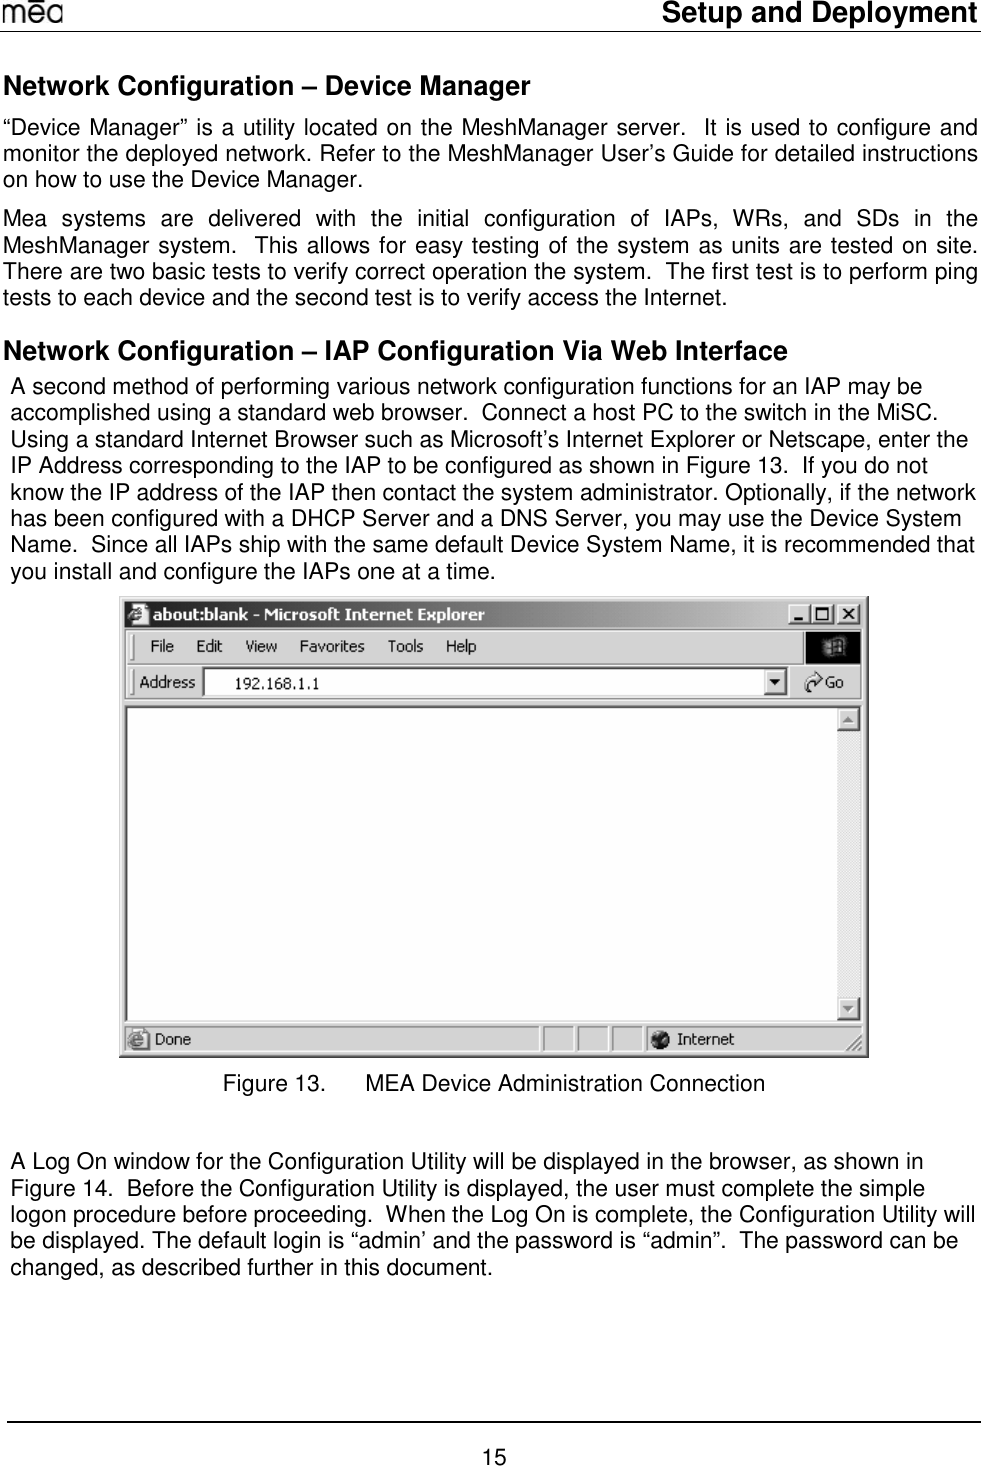     Setup and Deployment  15 Network Configuration – Device Manager “Device Manager” is a utility located on the MeshManager server.  It is used to configure and monitor the deployed network. Refer to the MeshManager User’s Guide for detailed instructions on how to use the Device Manager. Mea systems are delivered with the initial configuration of IAPs, WRs, and SDs in the MeshManager system.  This allows for easy testing of the system as units are tested on site.  There are two basic tests to verify correct operation the system.  The first test is to perform ping tests to each device and the second test is to verify access the Internet. Network Configuration – IAP Configuration Via Web Interface A second method of performing various network configuration functions for an IAP may be accomplished using a standard web browser.  Connect a host PC to the switch in the MiSC. Using a standard Internet Browser such as Microsoft’s Internet Explorer or Netscape, enter the IP Address corresponding to the IAP to be configured as shown in Figure 13.  If you do not know the IP address of the IAP then contact the system administrator. Optionally, if the network has been configured with a DHCP Server and a DNS Server, you may use the Device System Name.  Since all IAPs ship with the same default Device System Name, it is recommended that you install and configure the IAPs one at a time.  Figure 13.  MEA Device Administration Connection  A Log On window for the Configuration Utility will be displayed in the browser, as shown in Figure 14.  Before the Configuration Utility is displayed, the user must complete the simple logon procedure before proceeding.  When the Log On is complete, the Configuration Utility will be displayed. The default login is “admin’ and the password is “admin”.  The password can be changed, as described further in this document. 